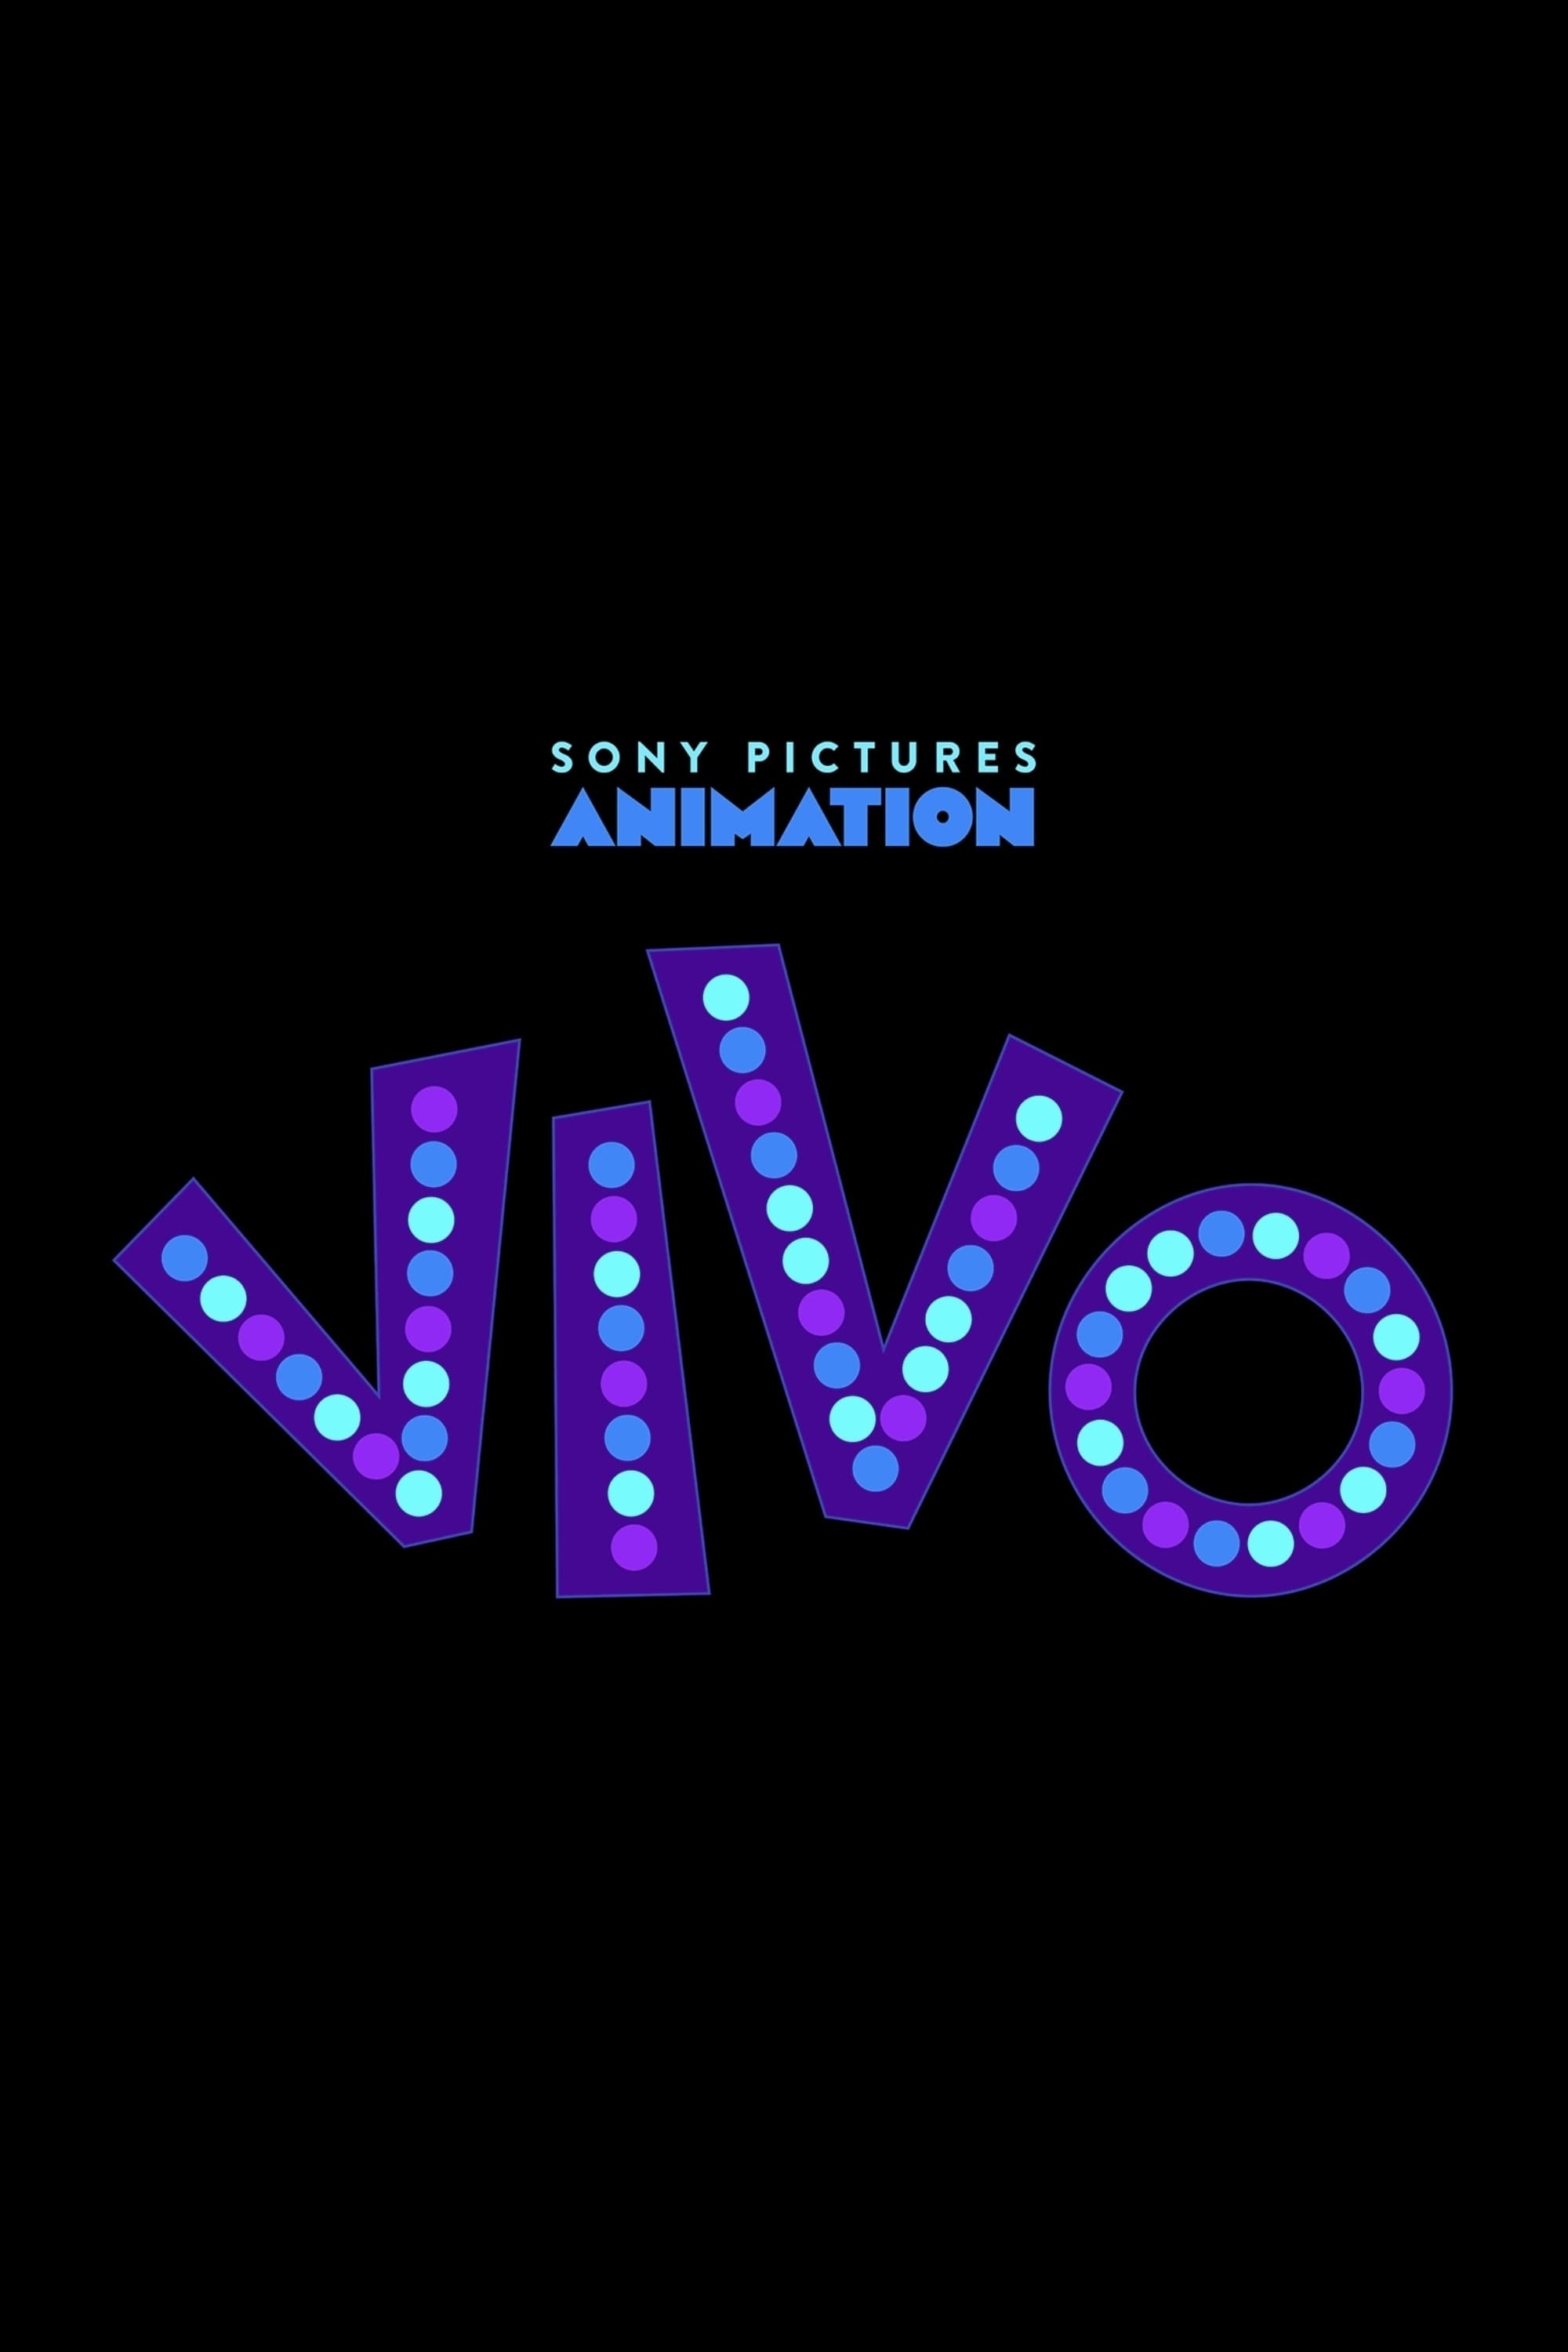 Vivo movie, Top free wallpapers, Movie backgrounds, Vibrant visual, 2000x3000 HD Phone